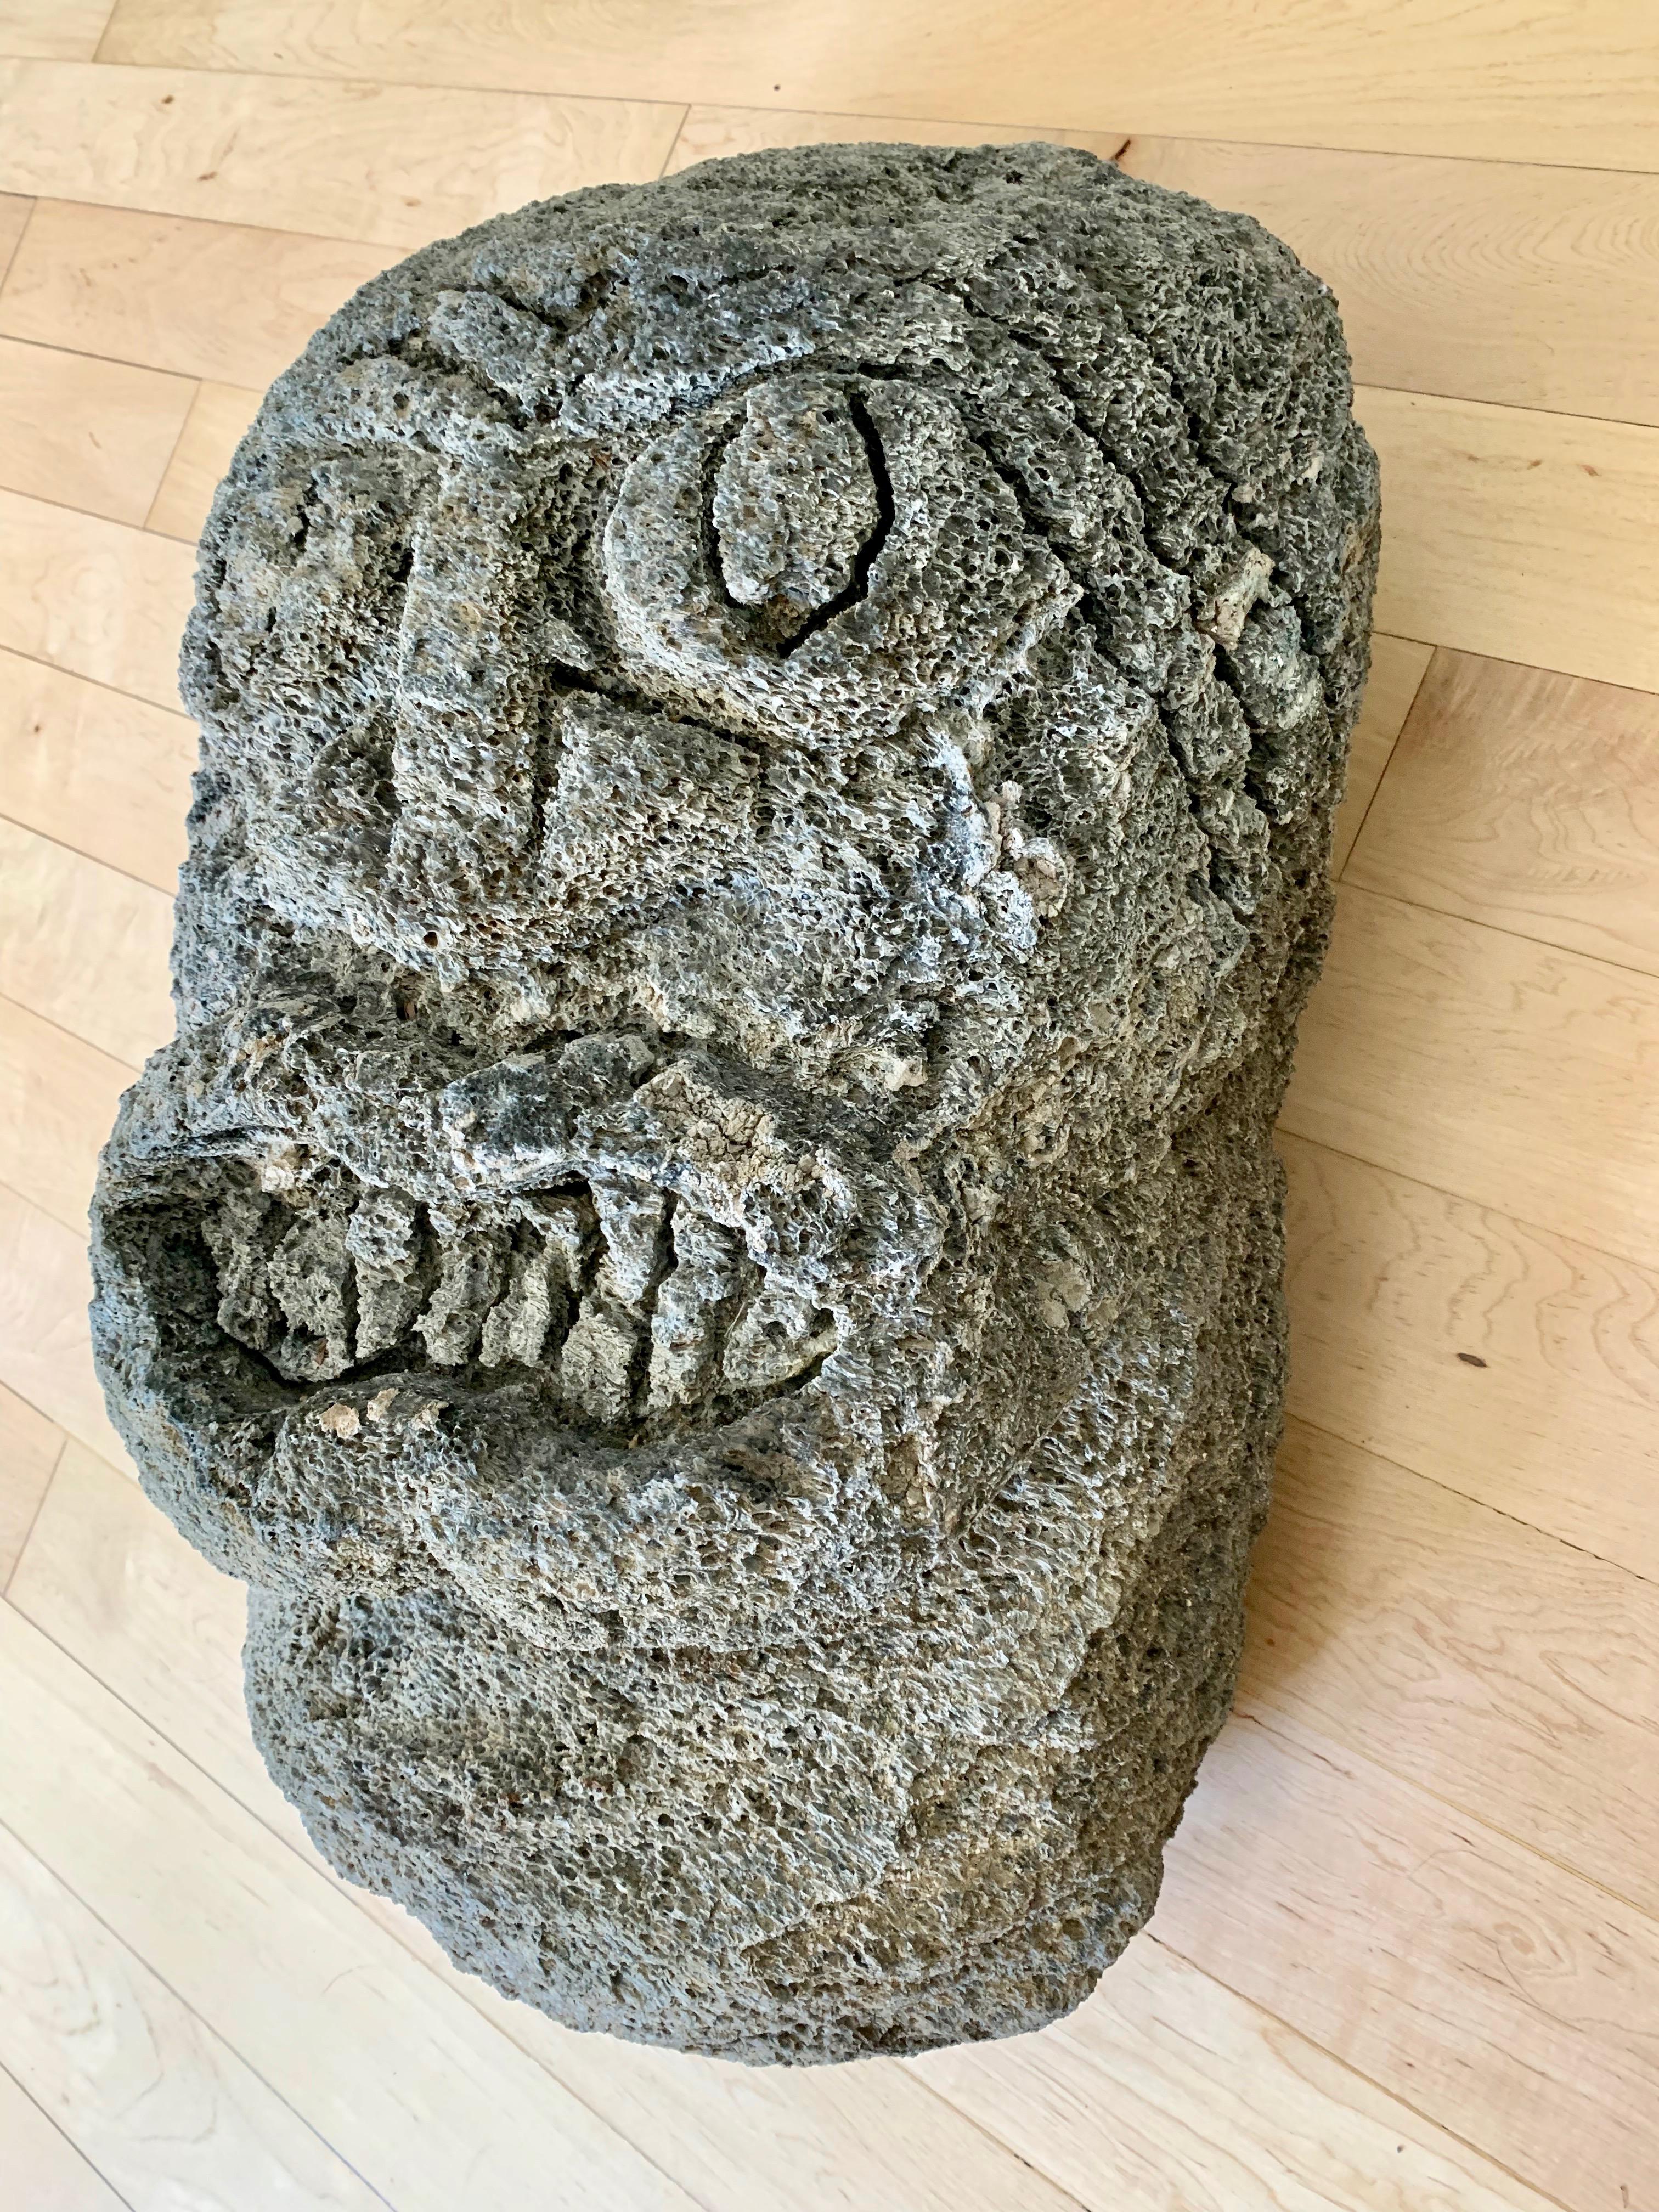 Heavy lava rock sculpture with a face hand carved into the front. Massive scale. Excellent condition. Huge presence and great coloring.